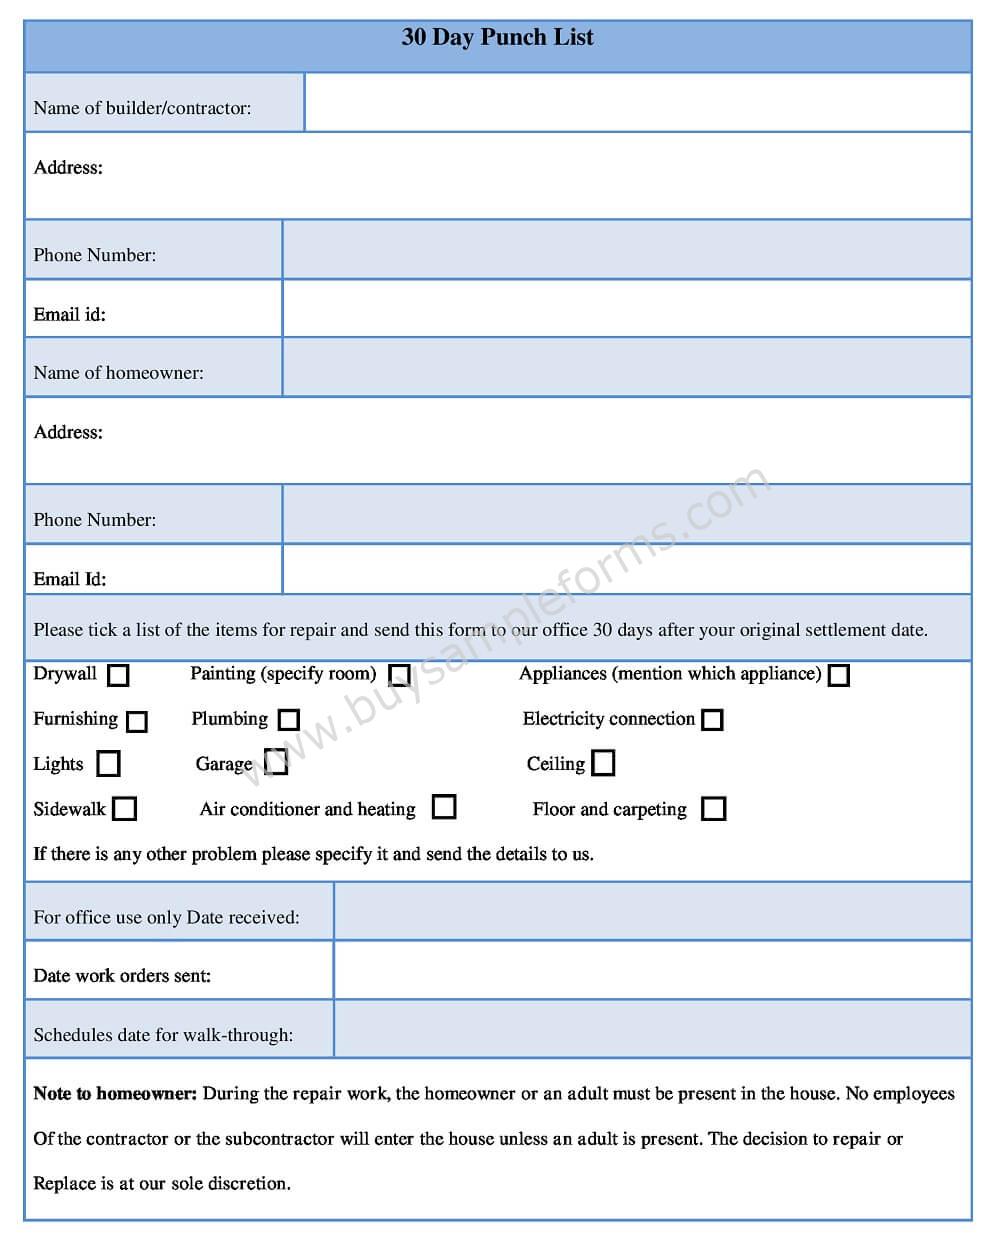 30 Day Punch list Form Template, Sample Punch list Form word Format